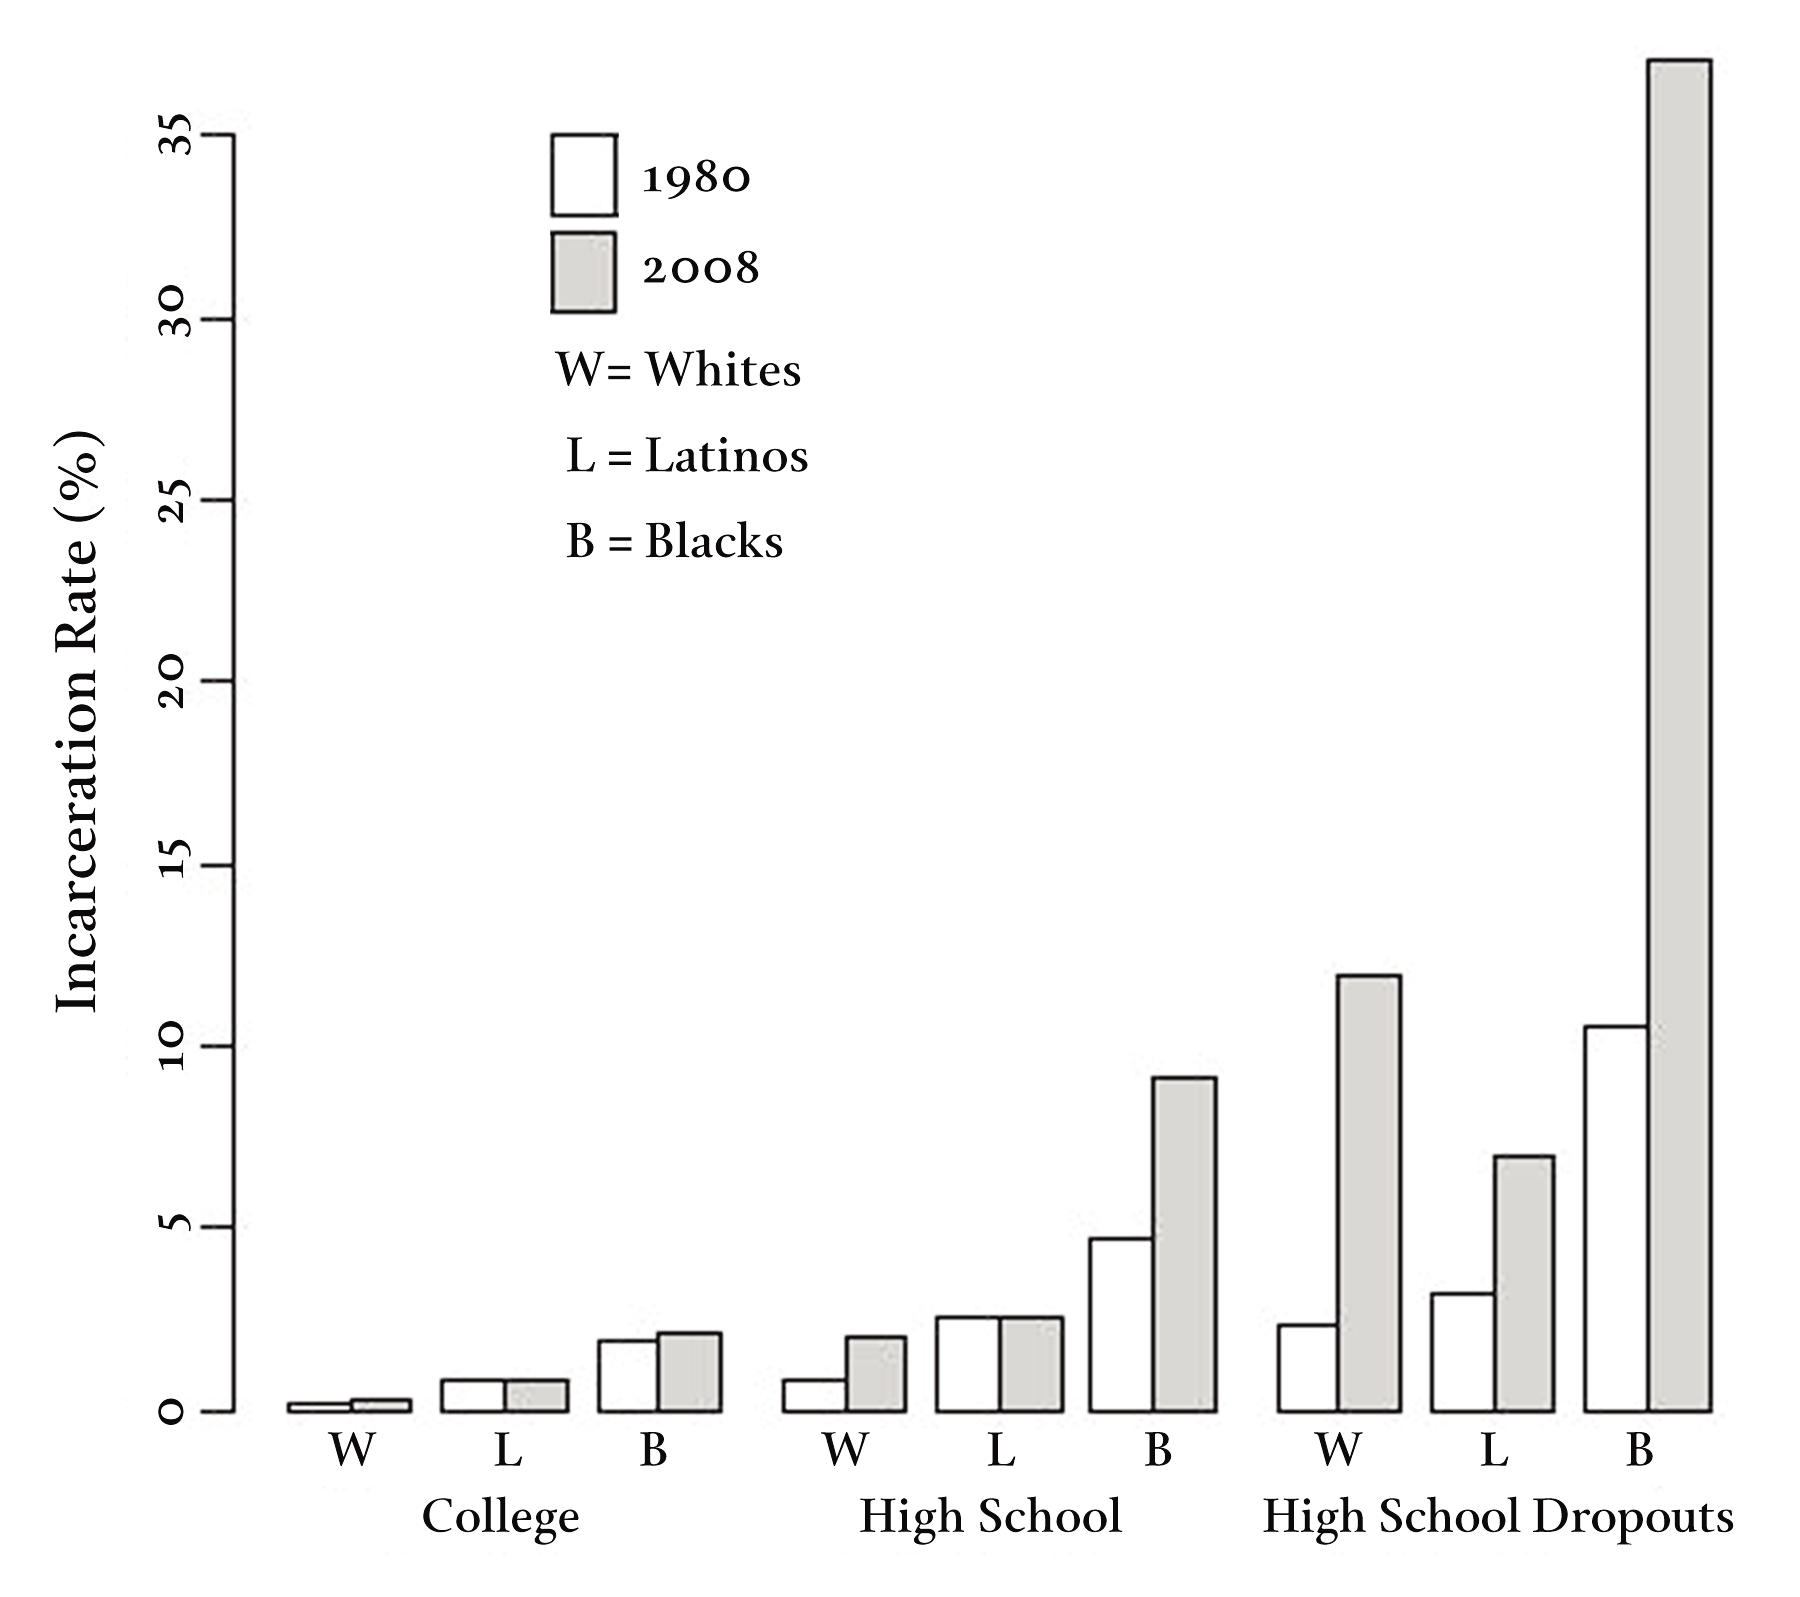 Figure 1: Percentage of Men Aged Twenty to Thirty-Four in Prison or Jail, by Race/Ethnicity and Education, 1980 and 2008